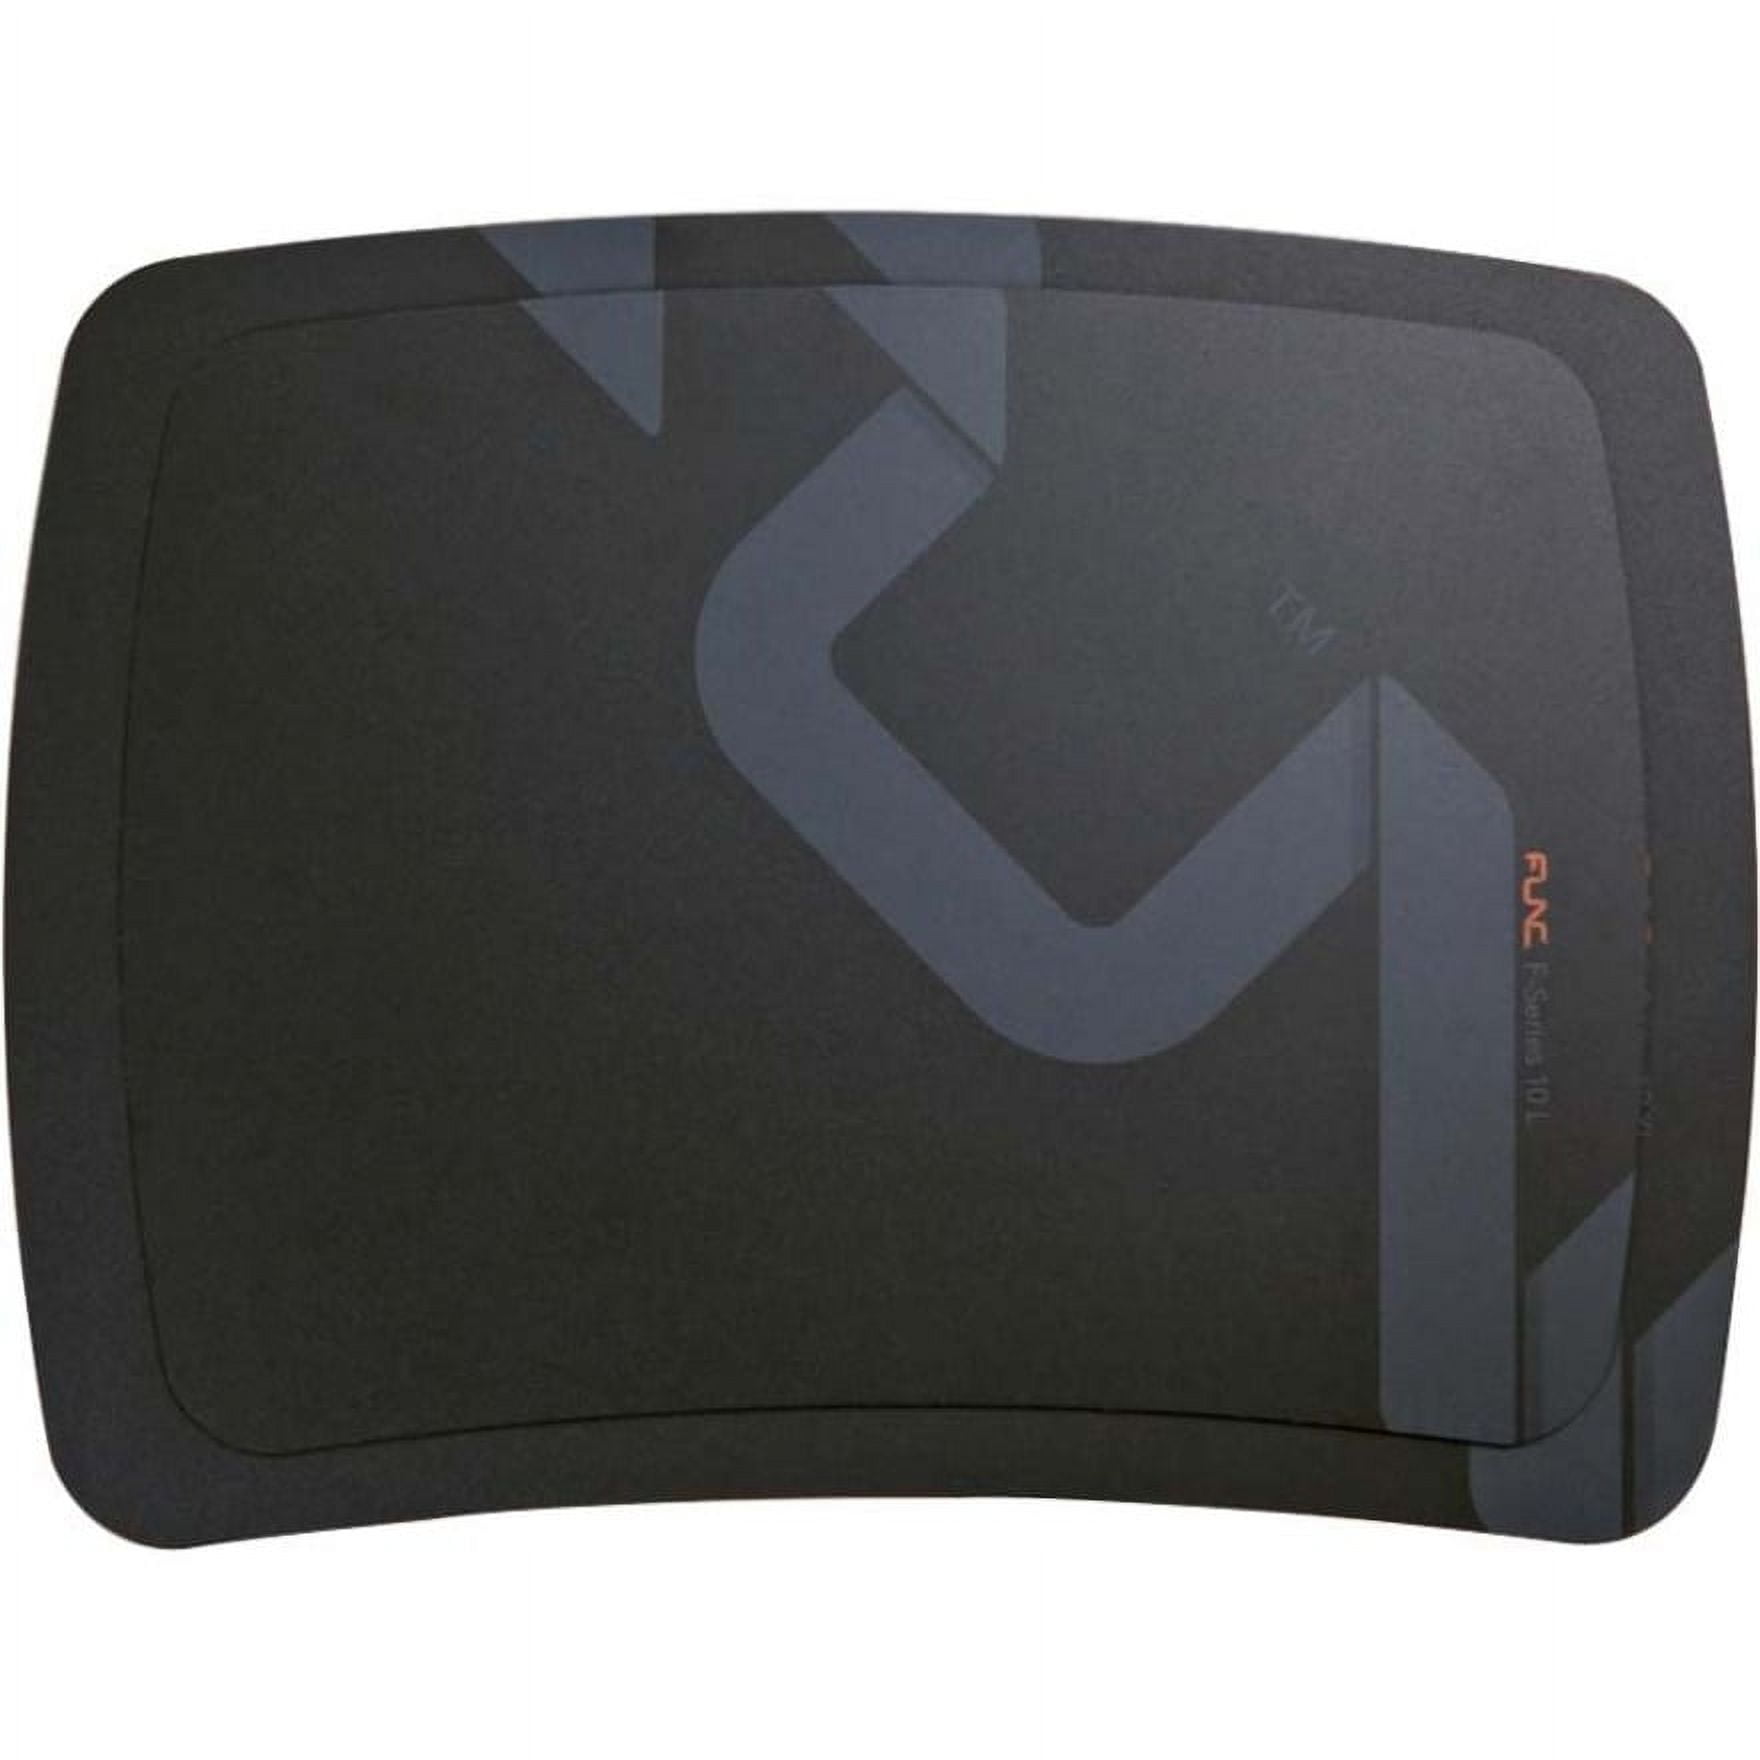 FUNC F-Series 10XL Gaming Mouse Pad